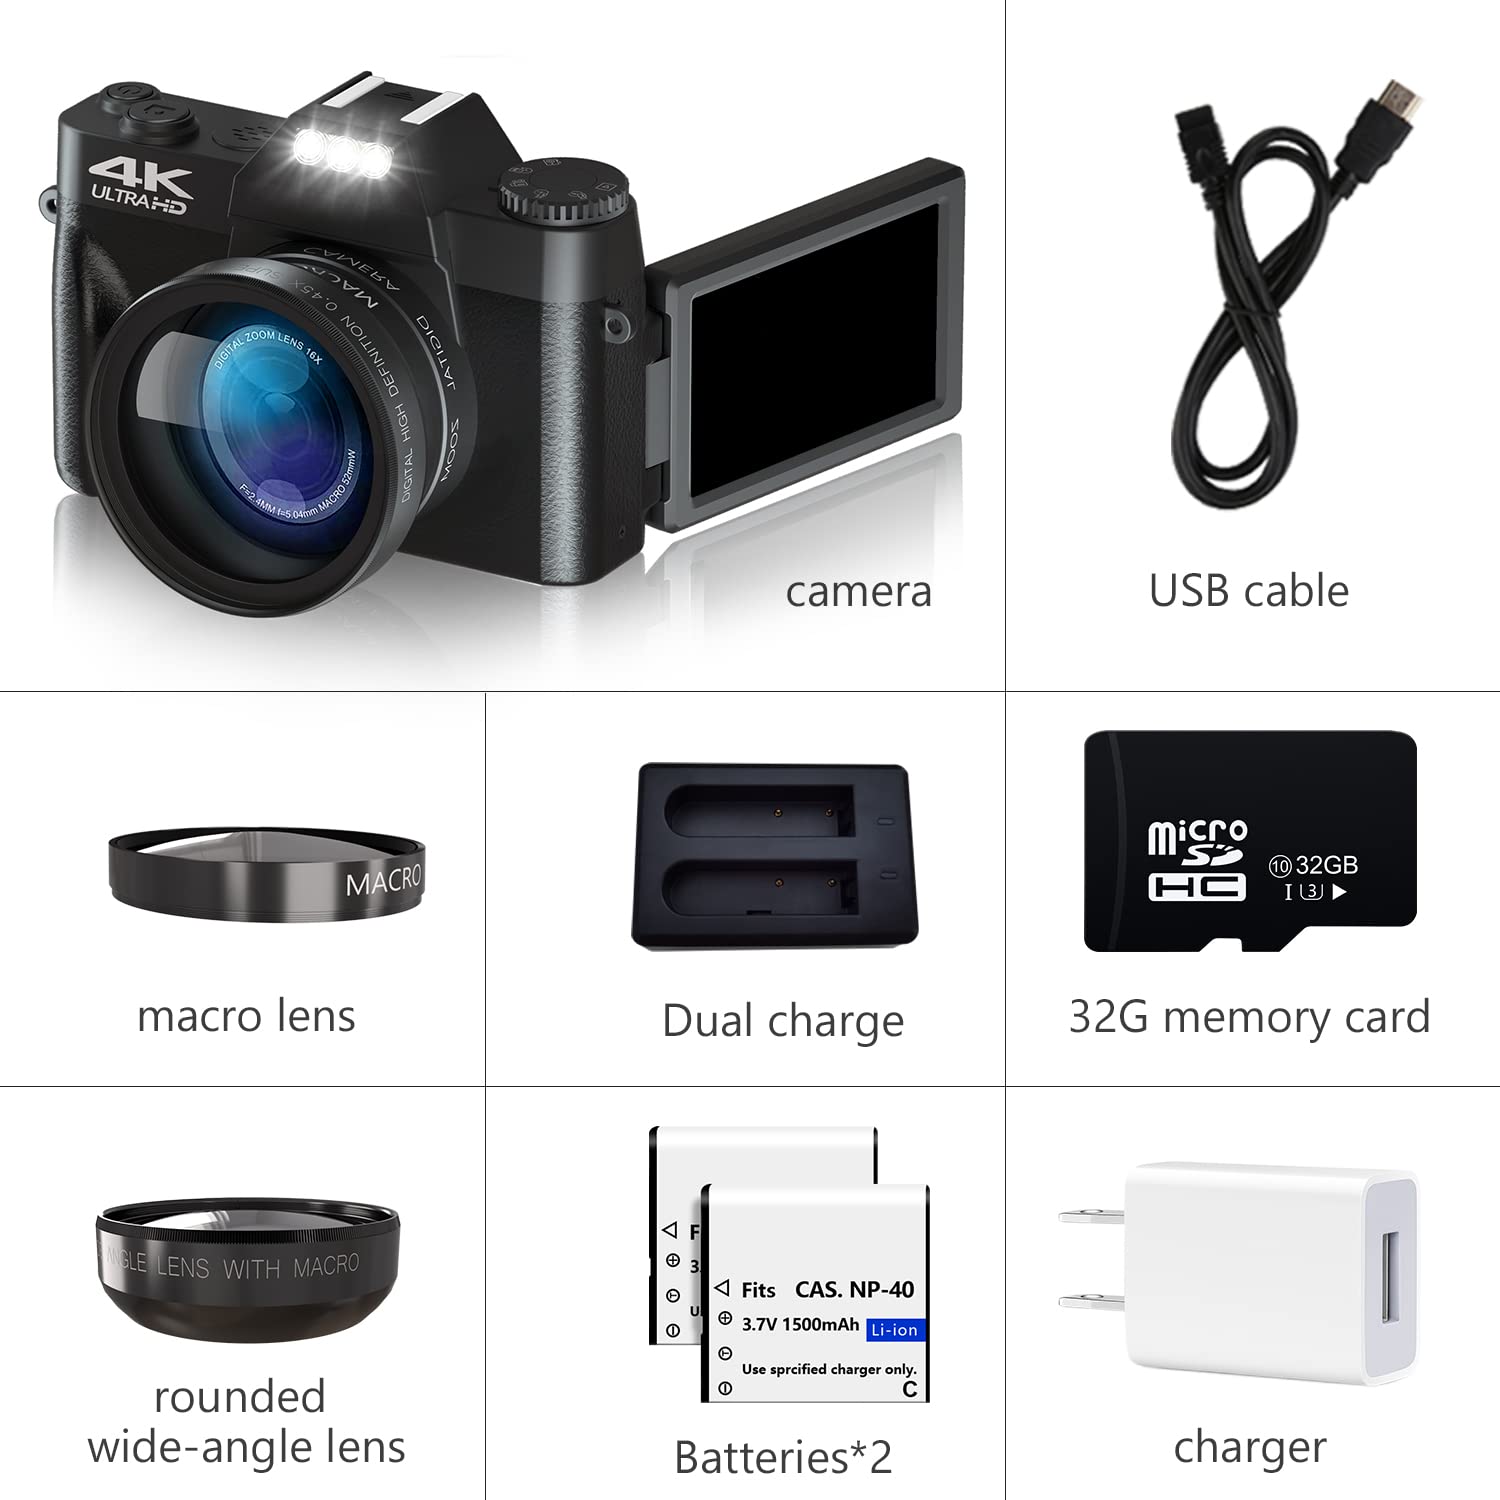 Digital Camera for Photography 4K 48MP VJIANGER Vlogging Camera for YouTube with 3.0’’ 180° Flip Screen, 16X Digital Zoom, 52MM Wide Angle Lens & Macro Lens, 2 Batteries, 32GB Micro SD Card(W01 B4)